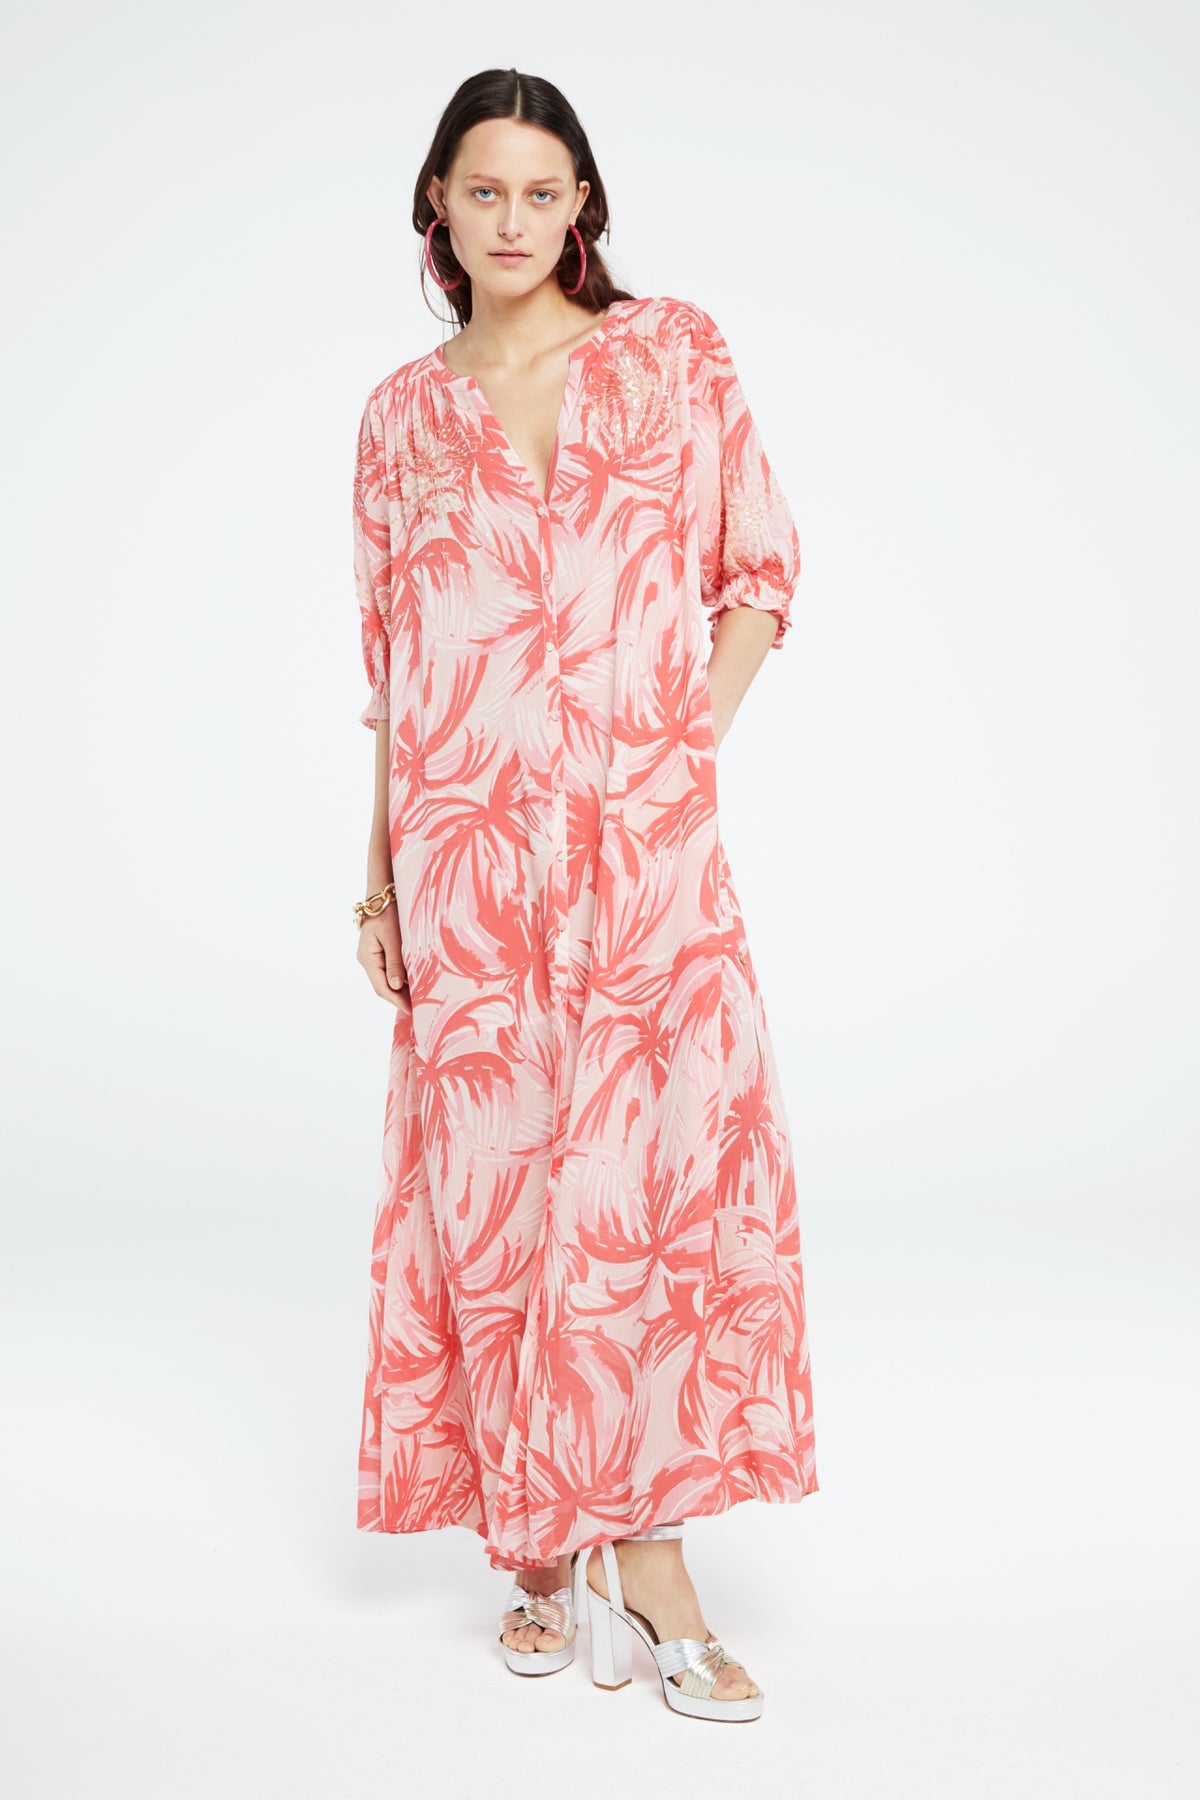 Pink blush and coral tropical floral print maxi shirt dress with elbow length sleeves with iridescent sequin bursts on the upper bodice and sleeves